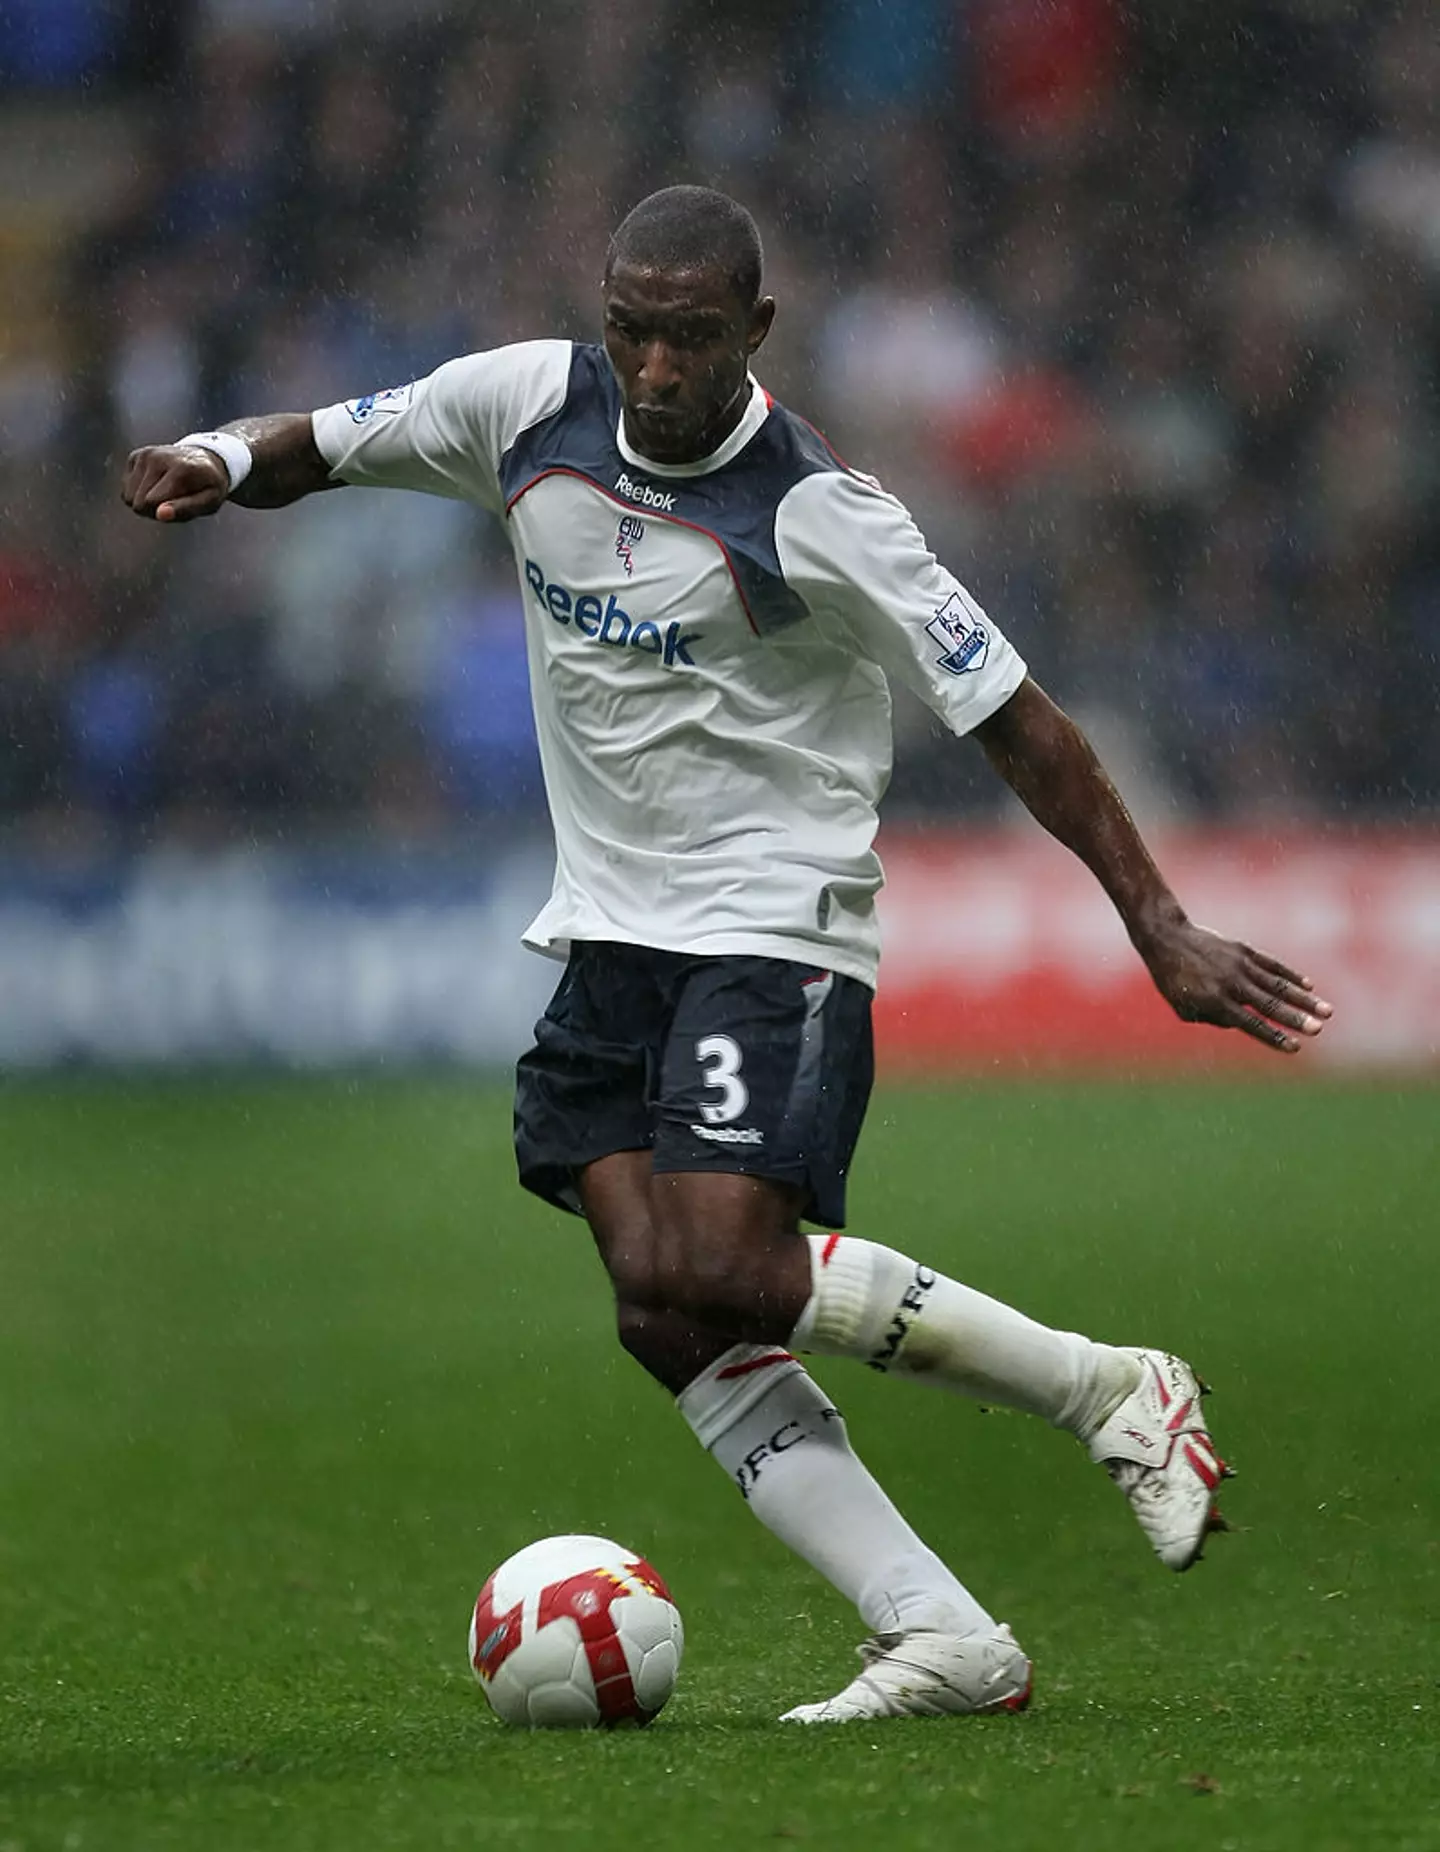 Jlloyd Samuel died in 2018 after being involved in a car accident. (Gary M. Prior/Getty Images)